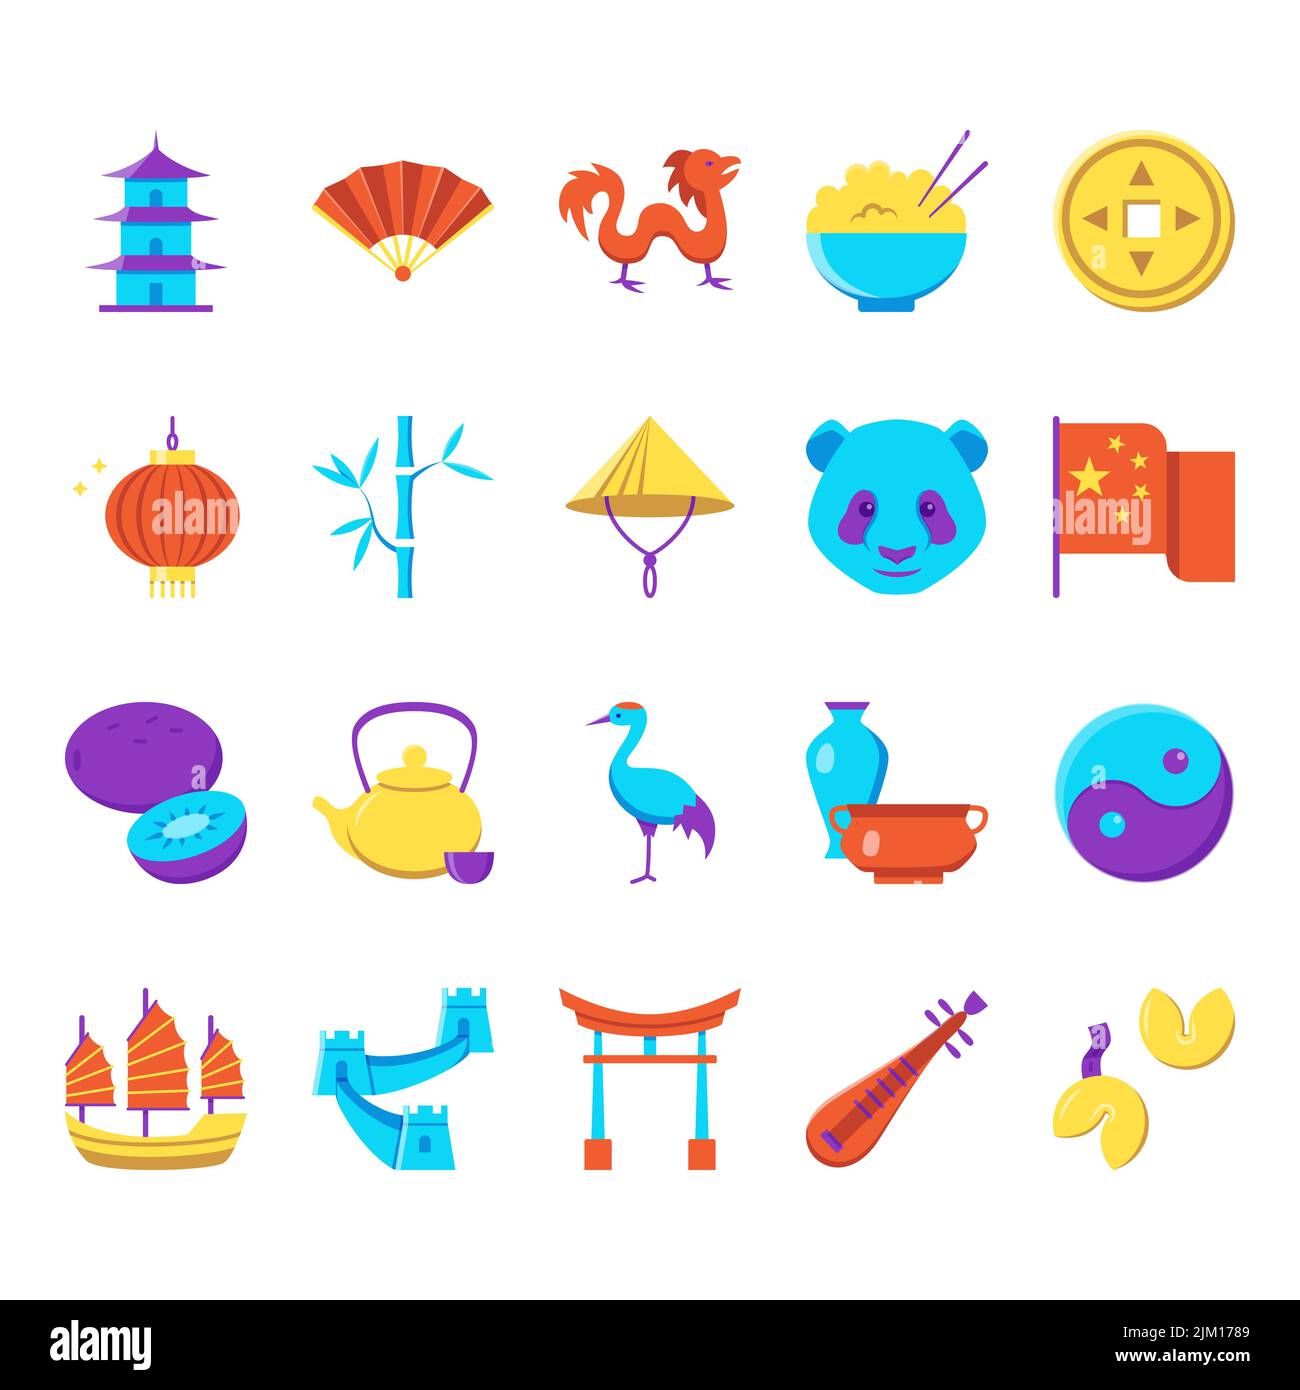 China icon set in flat style. Chinese traditional symbols. Vector illustration. Stock Vector